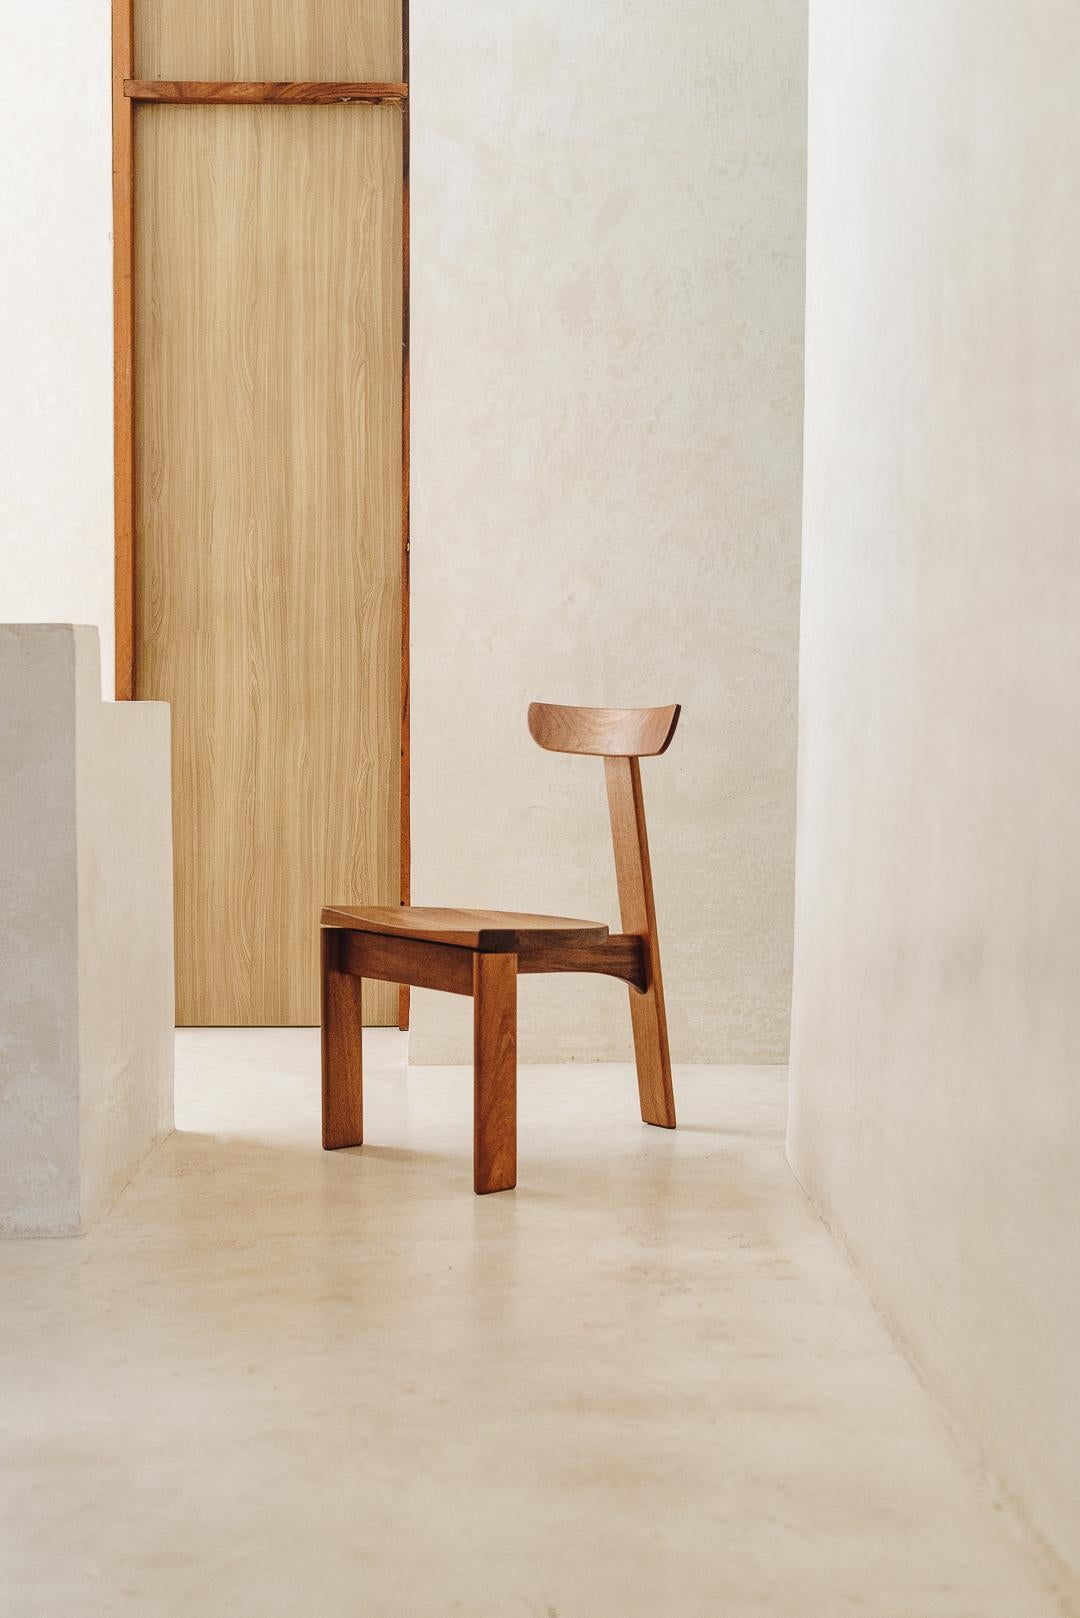 The Lumi chair is a very practical piece that has a sturdy, but yet delicate structure. The seat lays slightly above base level. The back of the chair is wide and comfortable. Its details can be appreciated at any angle and seen from behind, it is